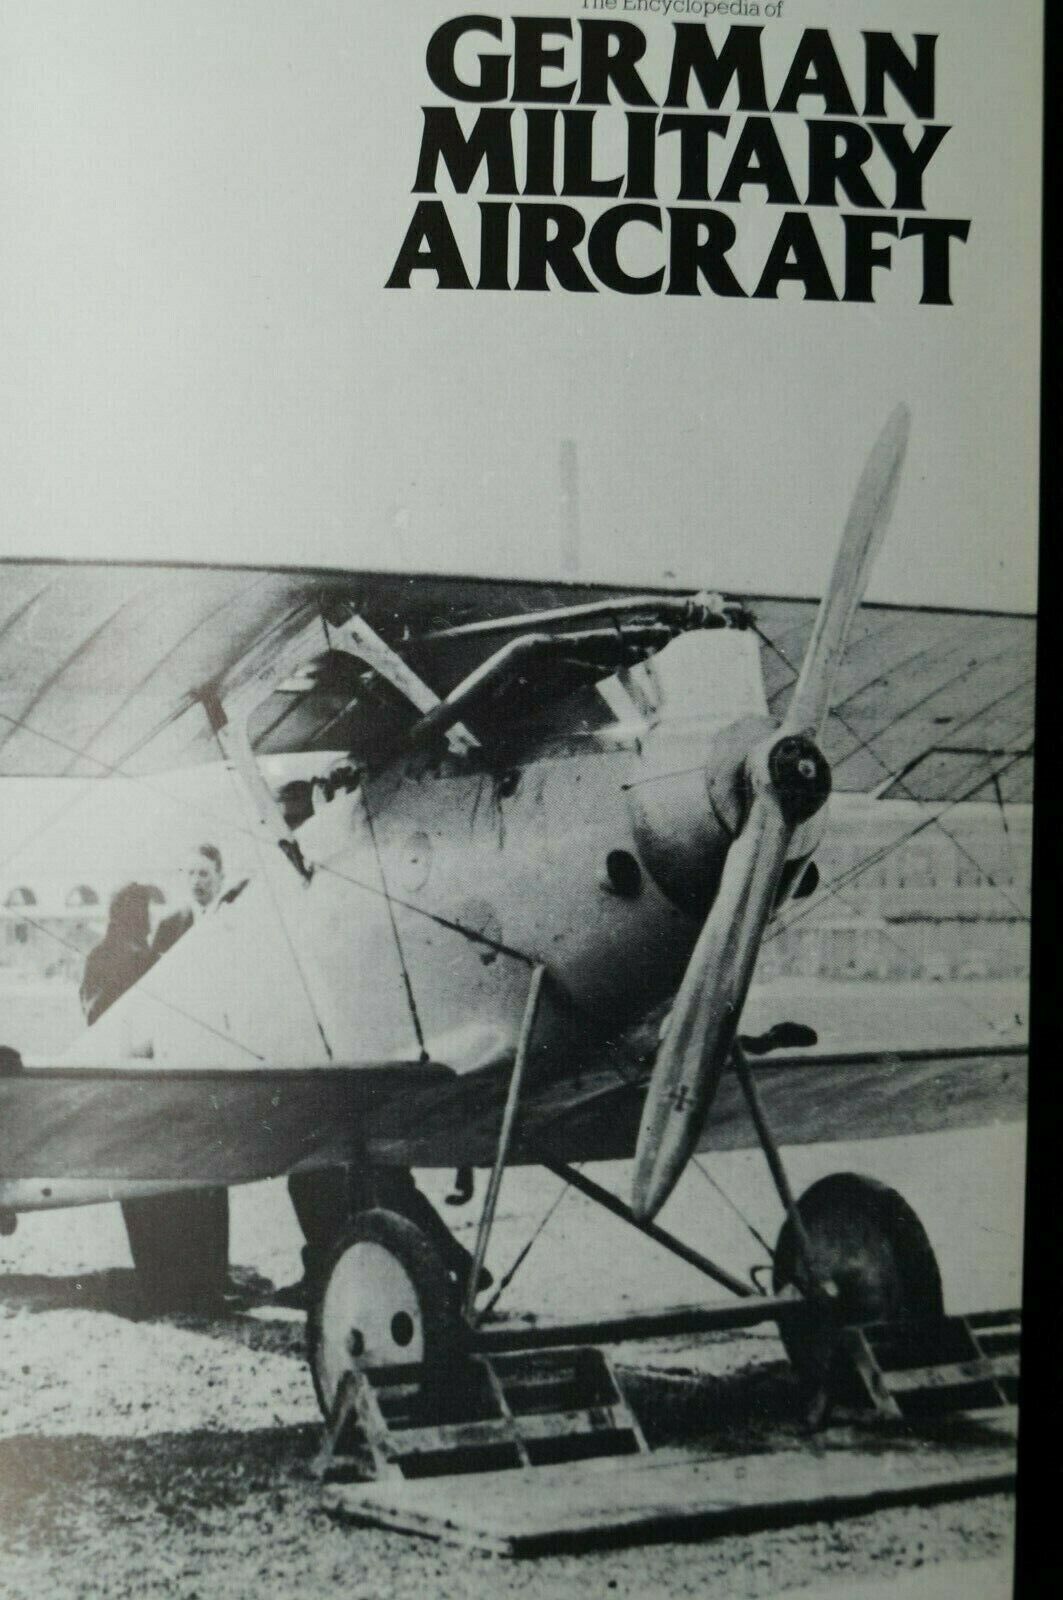 WW1 WW2  Post War Germany German Military Aircraft  Reference Book